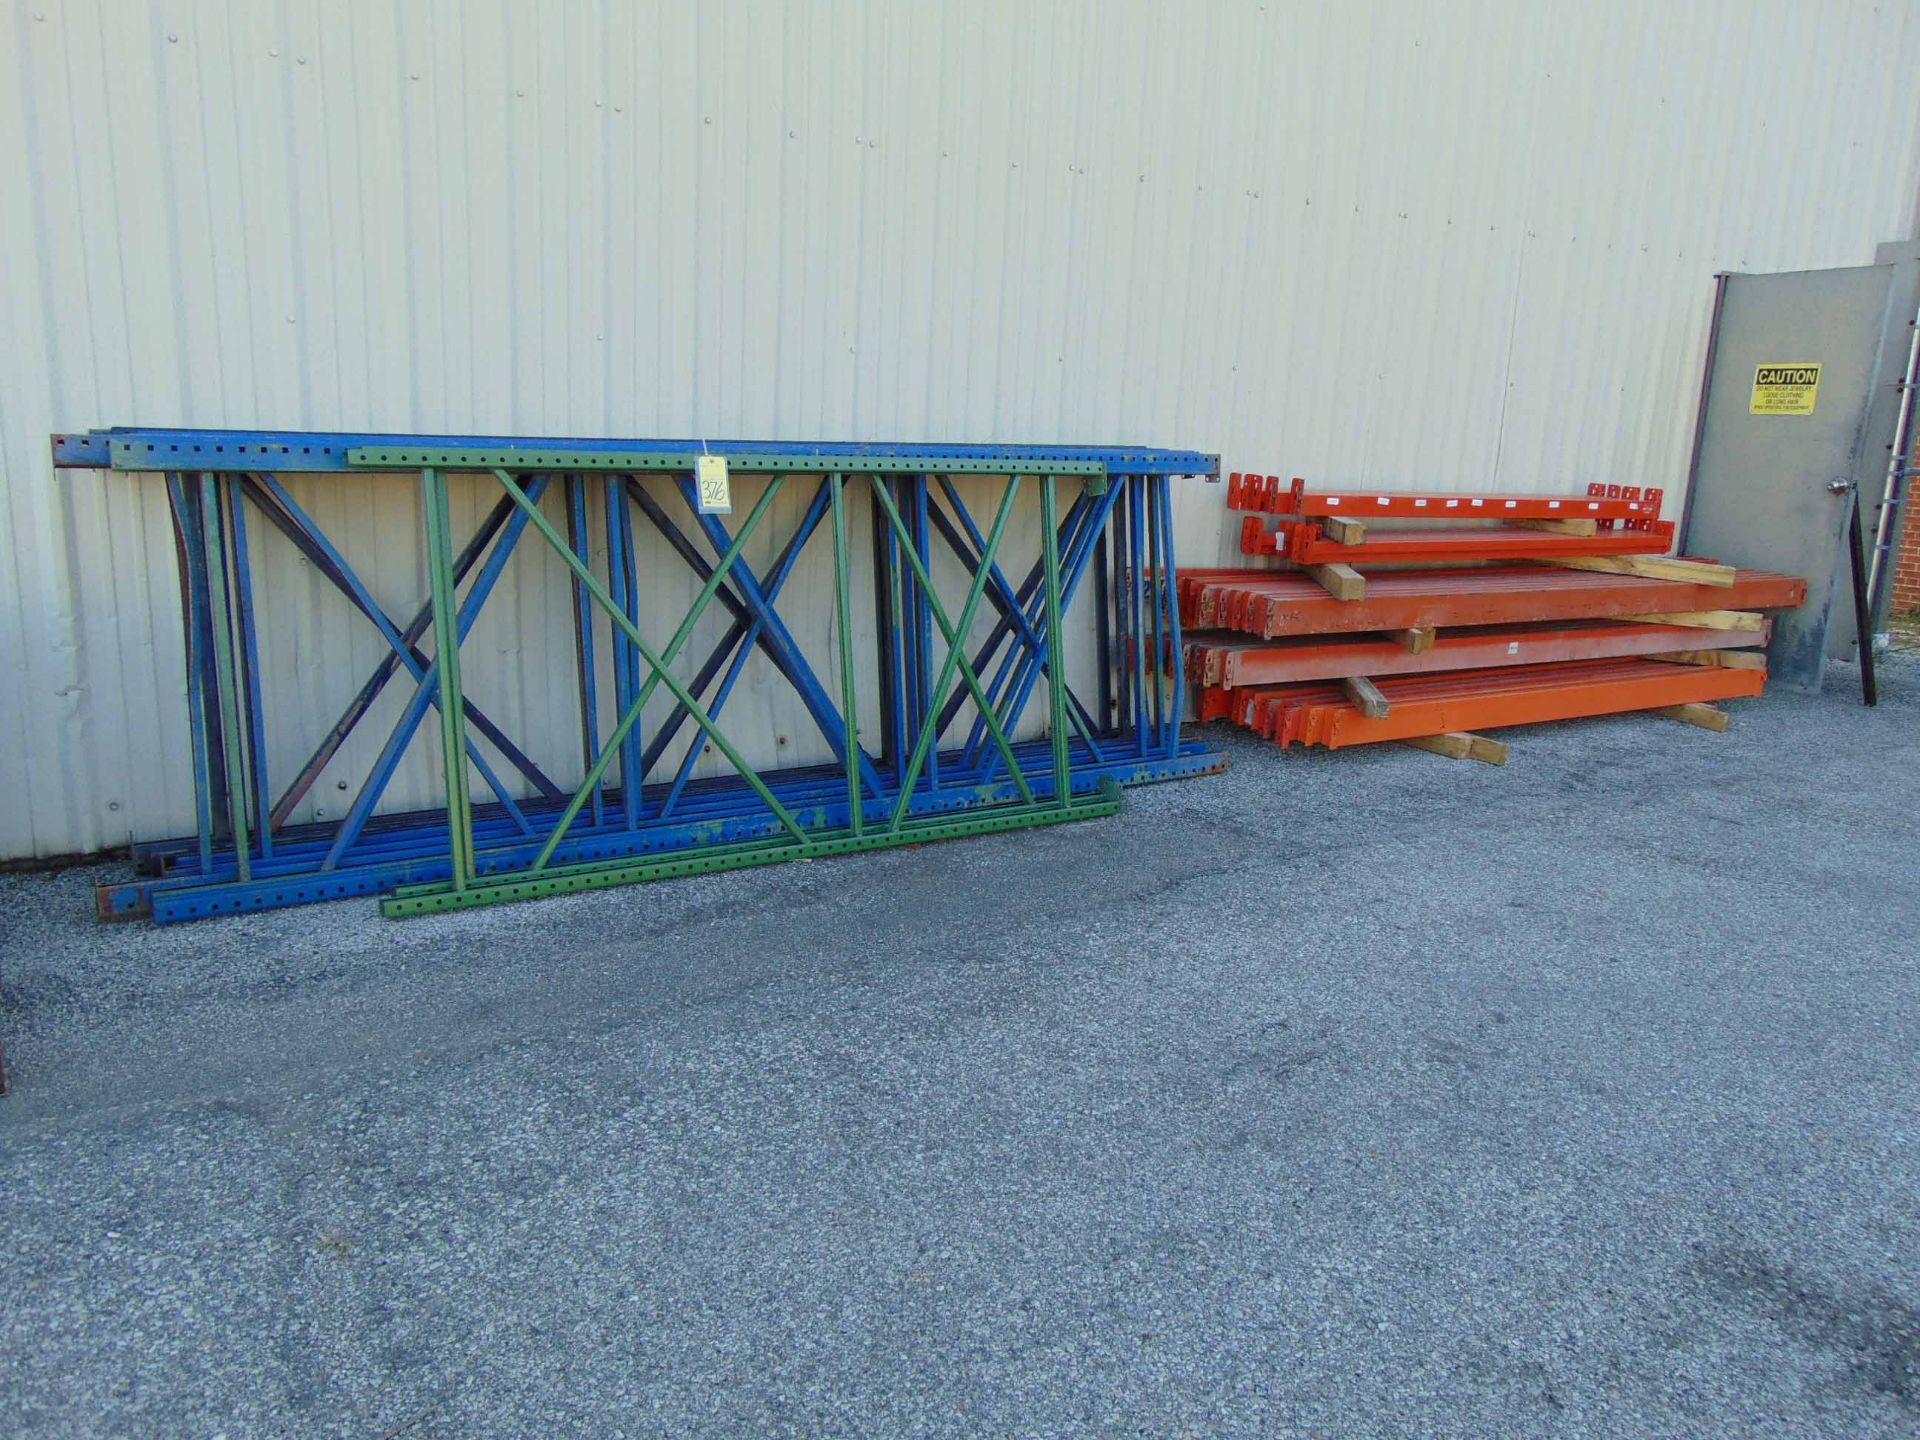 LOT OF PALLET RACKING: (8) uprights, (38) cross beams & assorted deck (located outside)